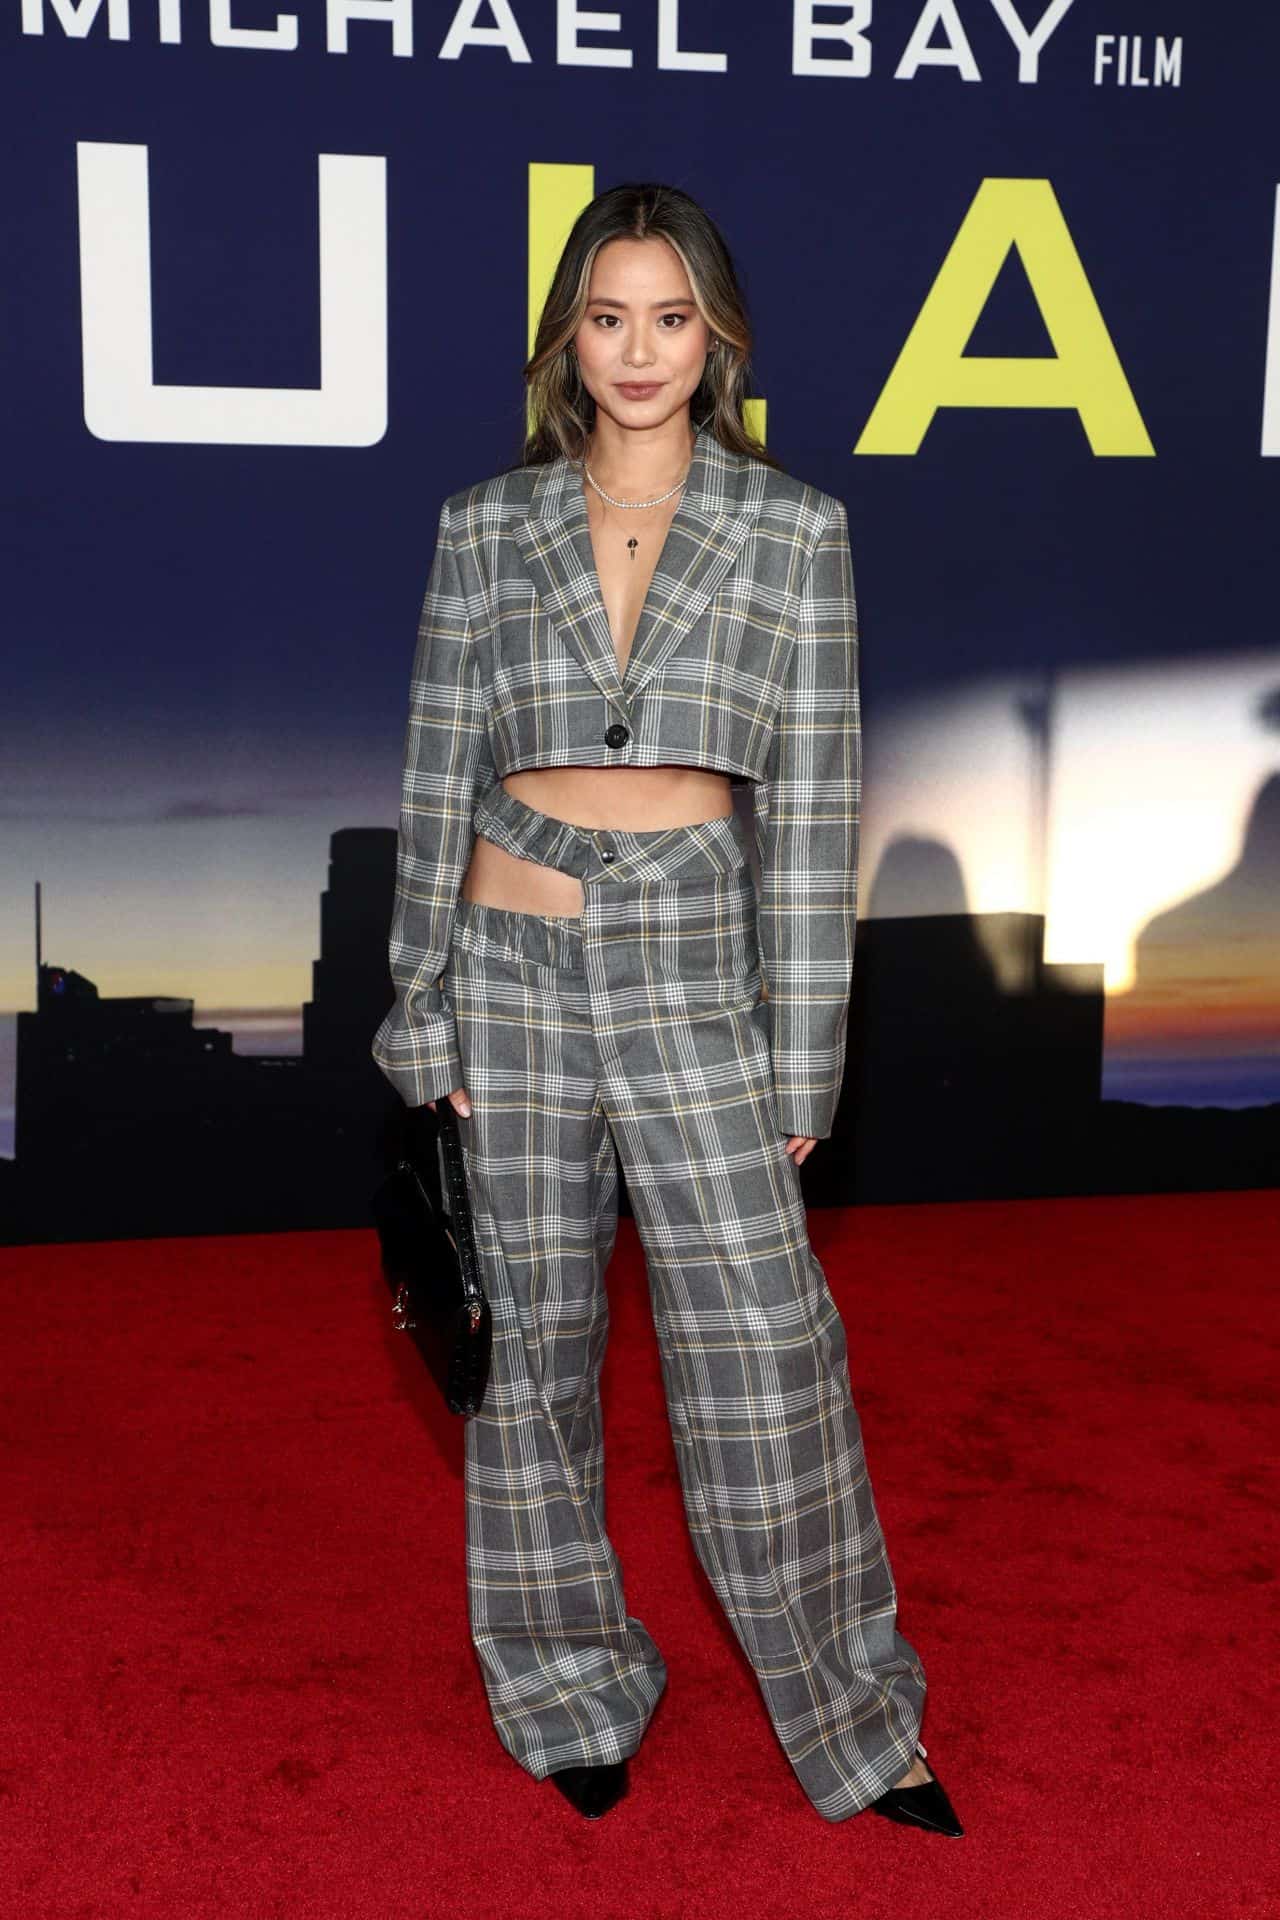 Jamie Chung Wears Cut-out Plaid Pants at the Premiere of Ambulance in LA